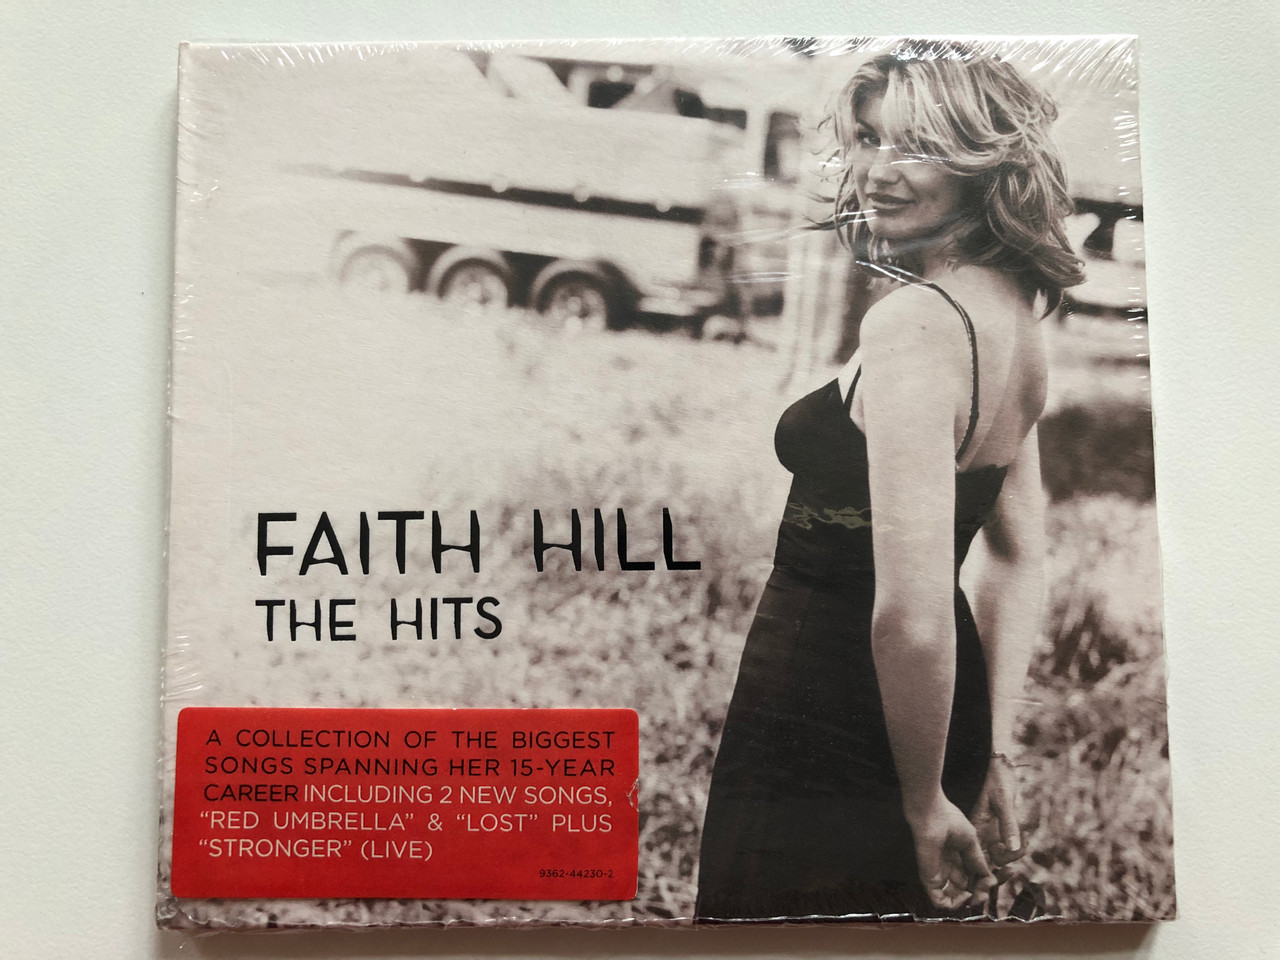 https://cdn10.bigcommerce.com/s-62bdpkt7pb/products/0/images/207859/Faith_Hill_The_Hits_A_Collection_Of_The_Biggest_Songs_Spanning_Her_15-Year_Career_Including_2_New_Songs_Red_Umbrella_Lost_Plus_Stronger_Live_Warner_Bros._Records_Audio_CD_1__16122.1642499330.1280.1280.JPG?c=2&_gl=1*1fboap2*_ga*MjA2NTIxMjE2MC4xNTkwNTEyNTMy*_ga_WS2VZYPC6G*MTY0MjQ4NzMxNy4yNjUuMS4xNjQyNDk5MTIyLjU3